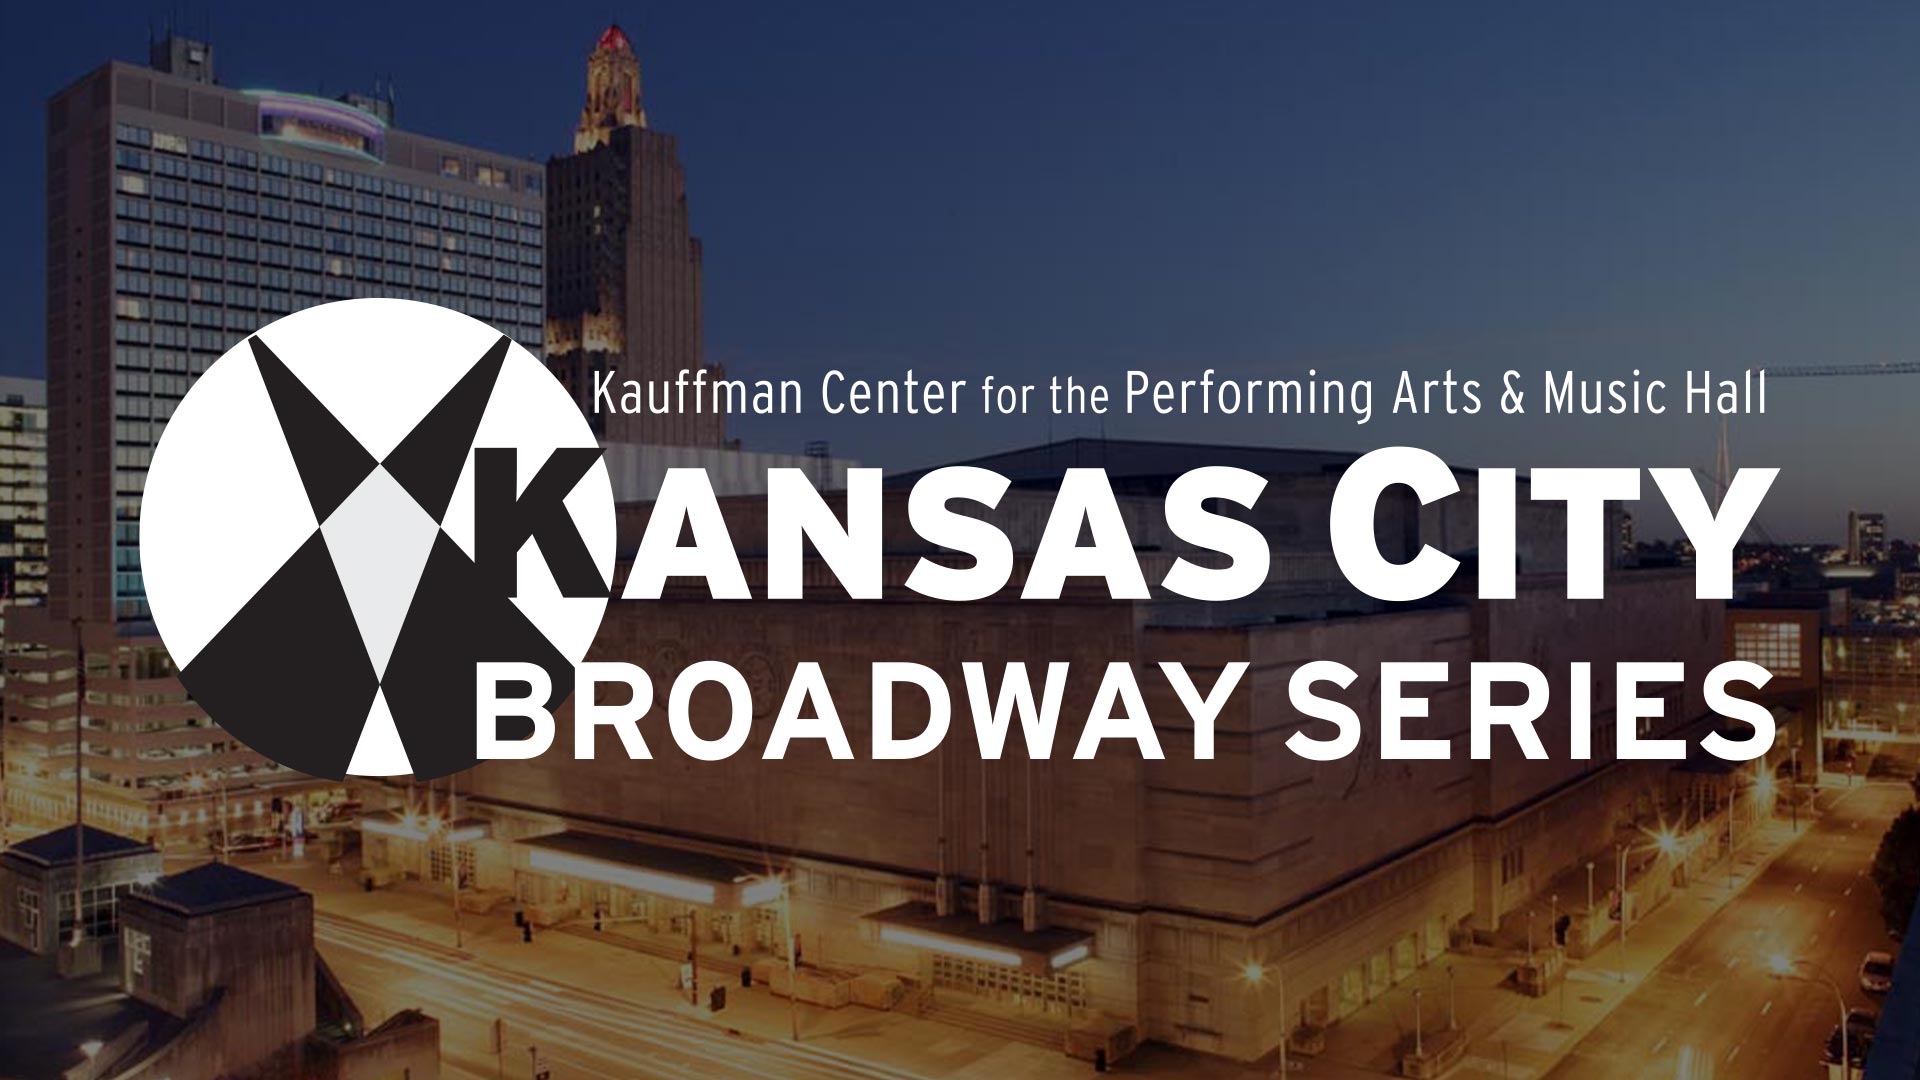 Kansas City Broadway Series logo overlaid on a photo of the exterior of the Music Hall in downtown Kansas City